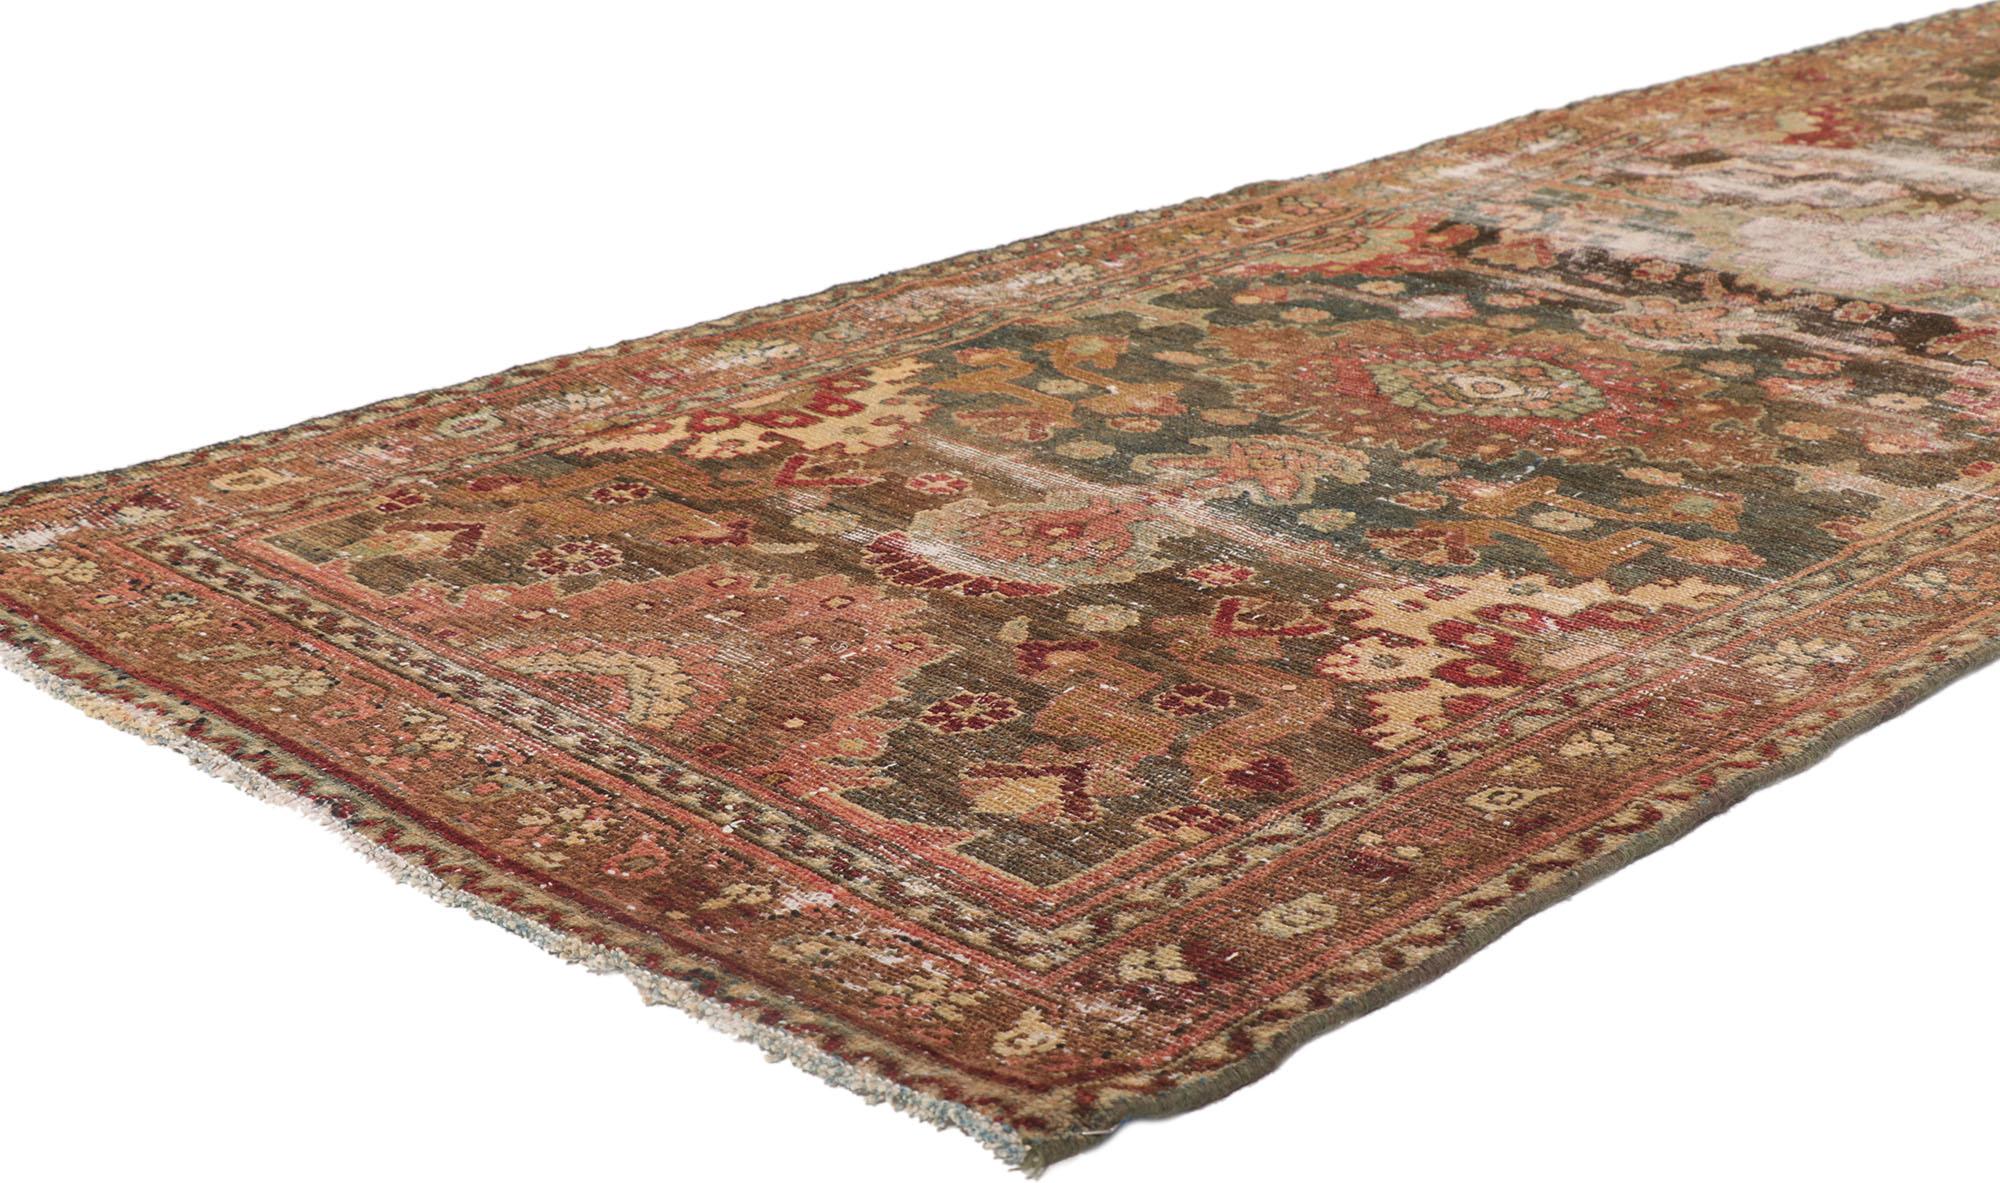 53763 Distressed Antique Persian Malayer Runner, 03'03 x 11'01. Warm and inviting with rustic sensibility, this hand-knotted wool distressed antique Persian Malayer runner features an all-over botanical design spread across the weathered